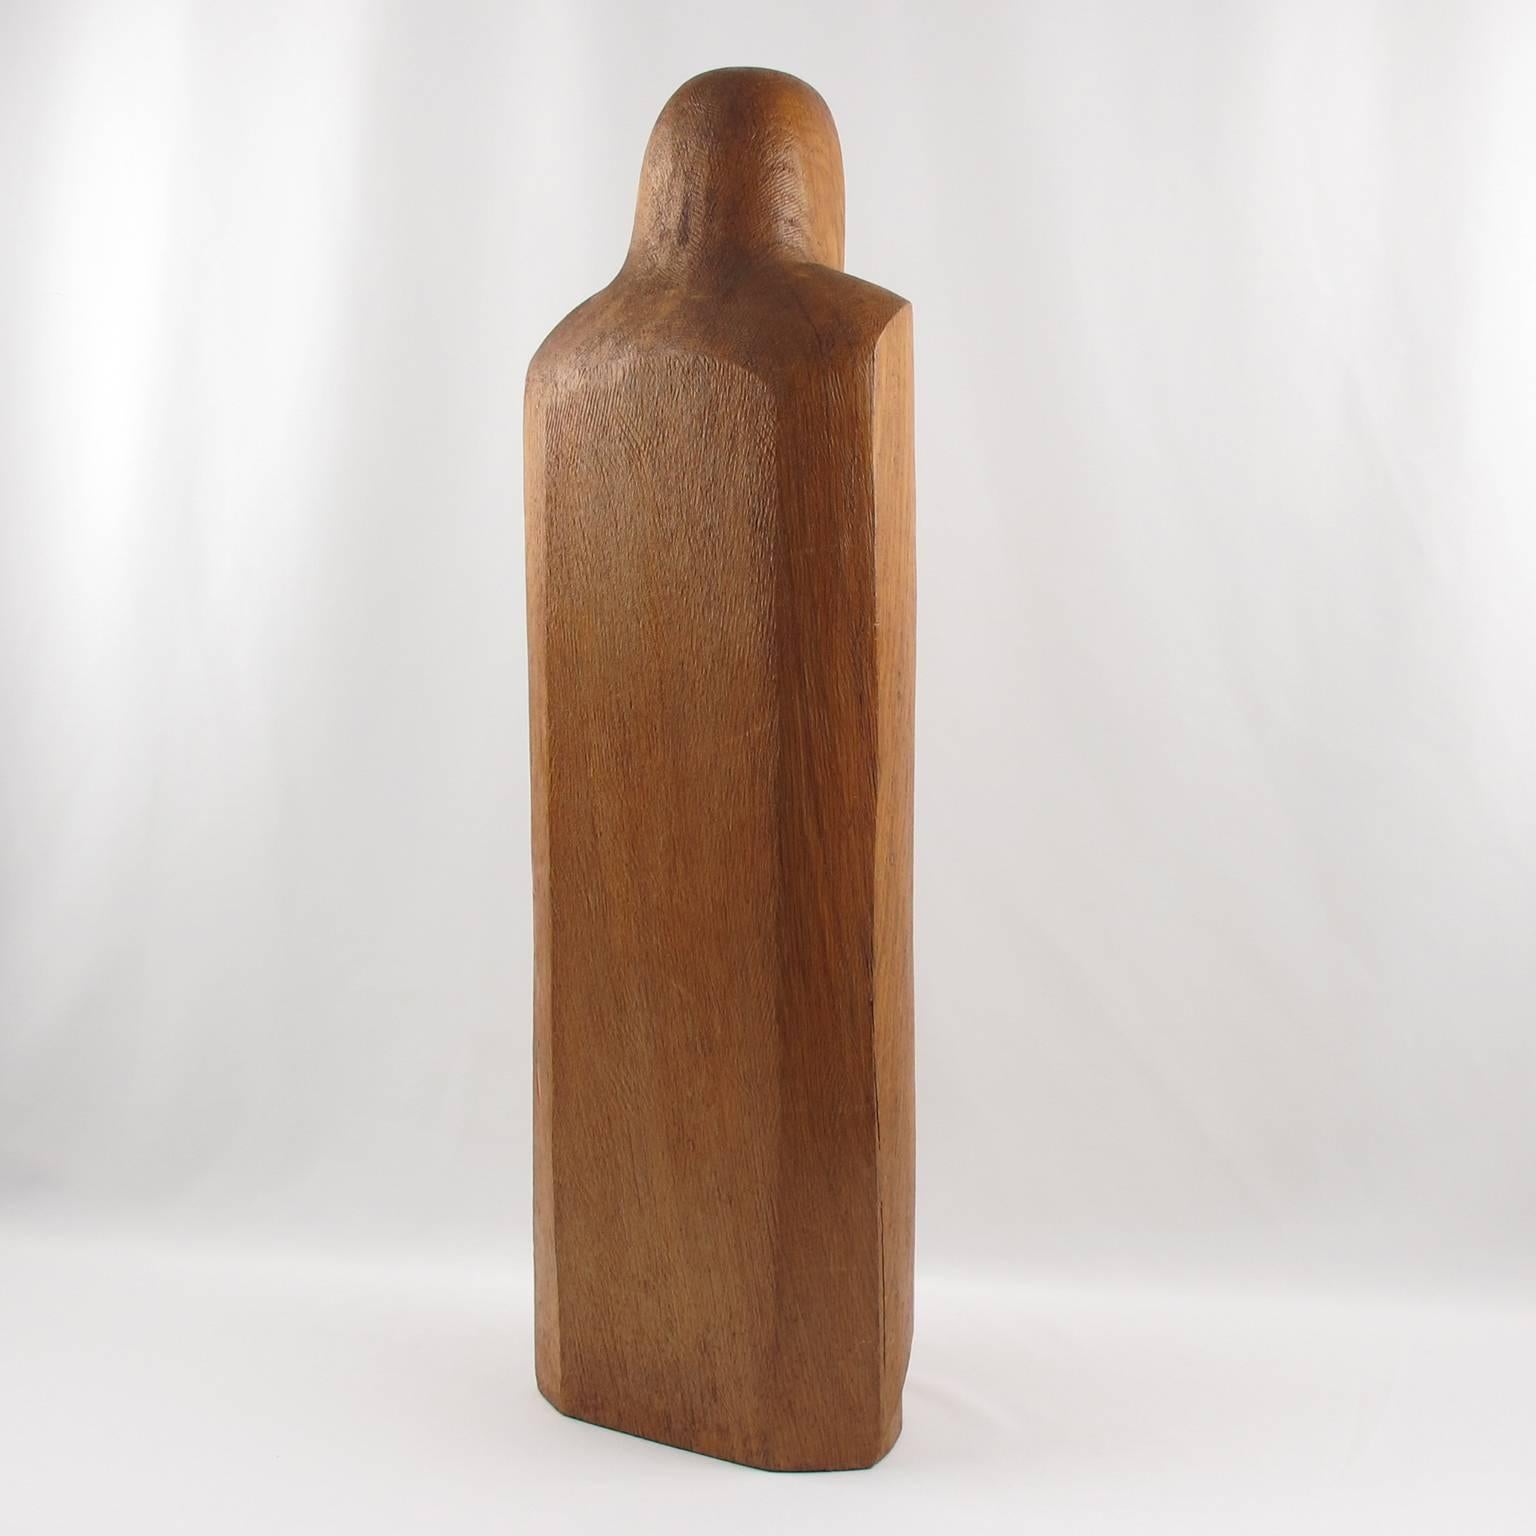 Luxembourgish Rare Wood Sculpture Monk or Knight Design by Wenzel Profant, circa 1950s